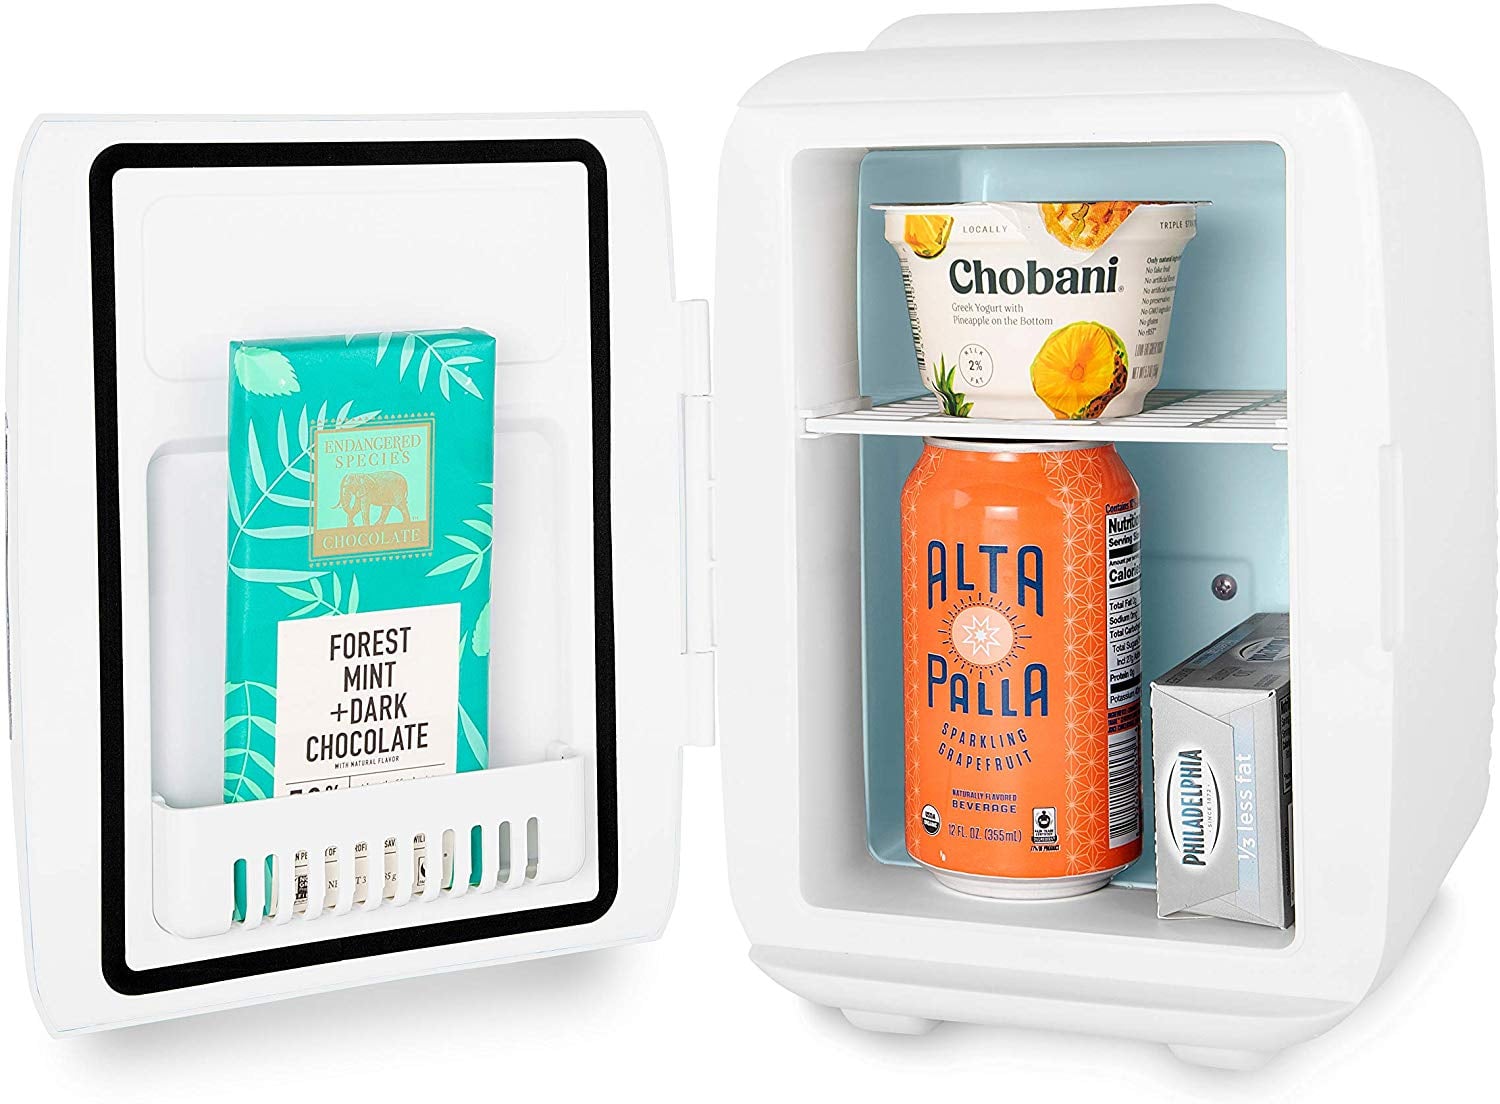 15 Perfect Gift Ideas for Artsy Tweens & Teens